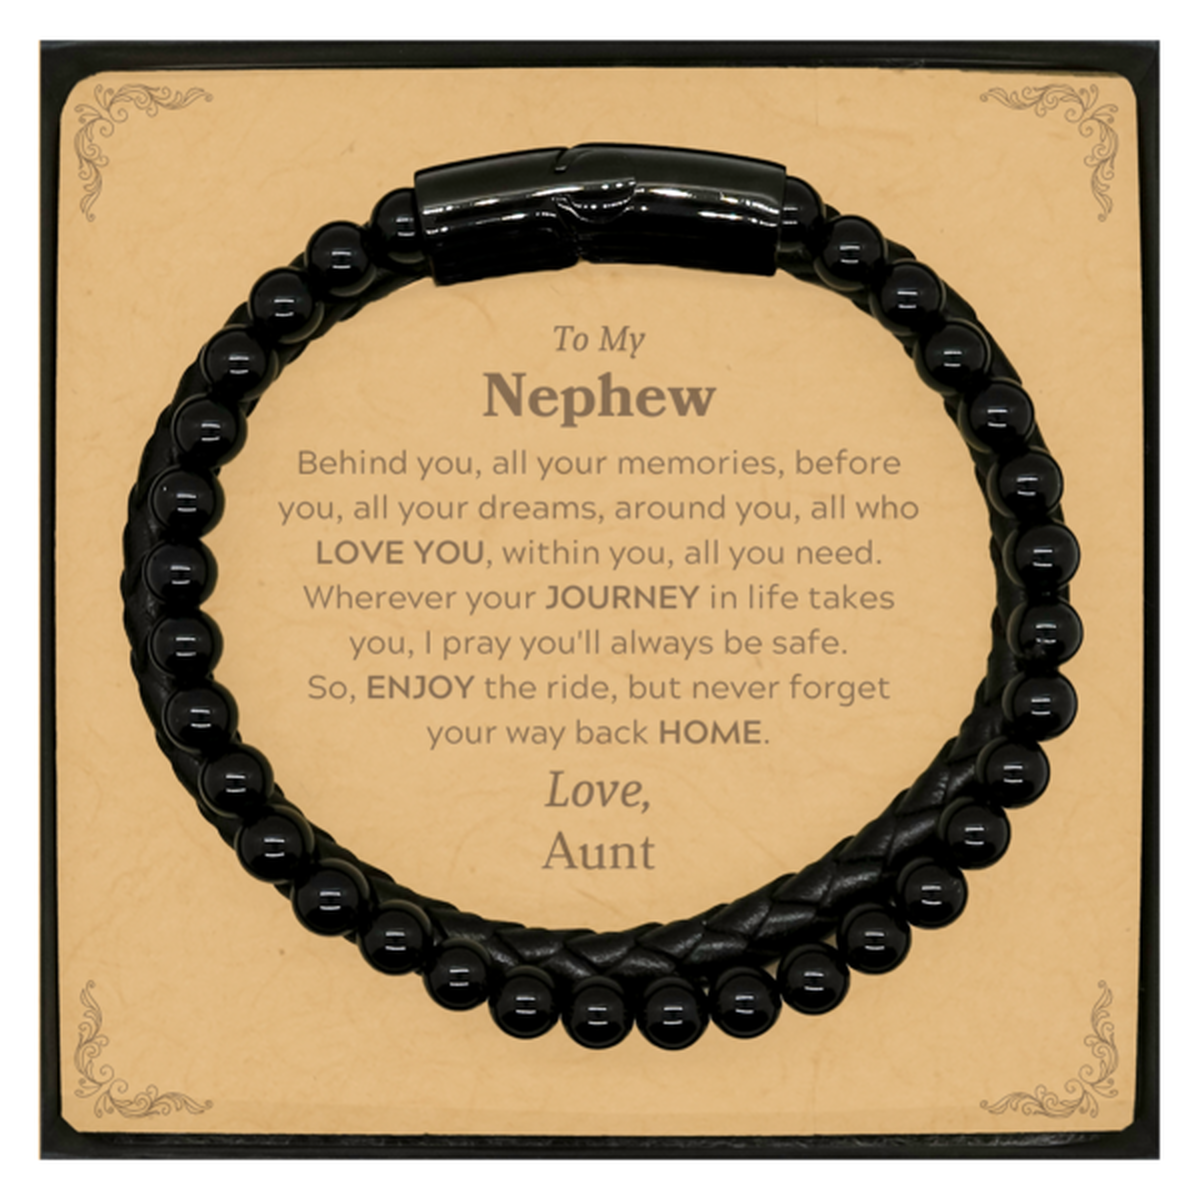 To My Nephew Graduation Gifts from Aunt, Nephew Stone Leather Bracelets Christmas Birthday Gifts for Nephew Behind you, all your memories, before you, all your dreams. Love, Aunt